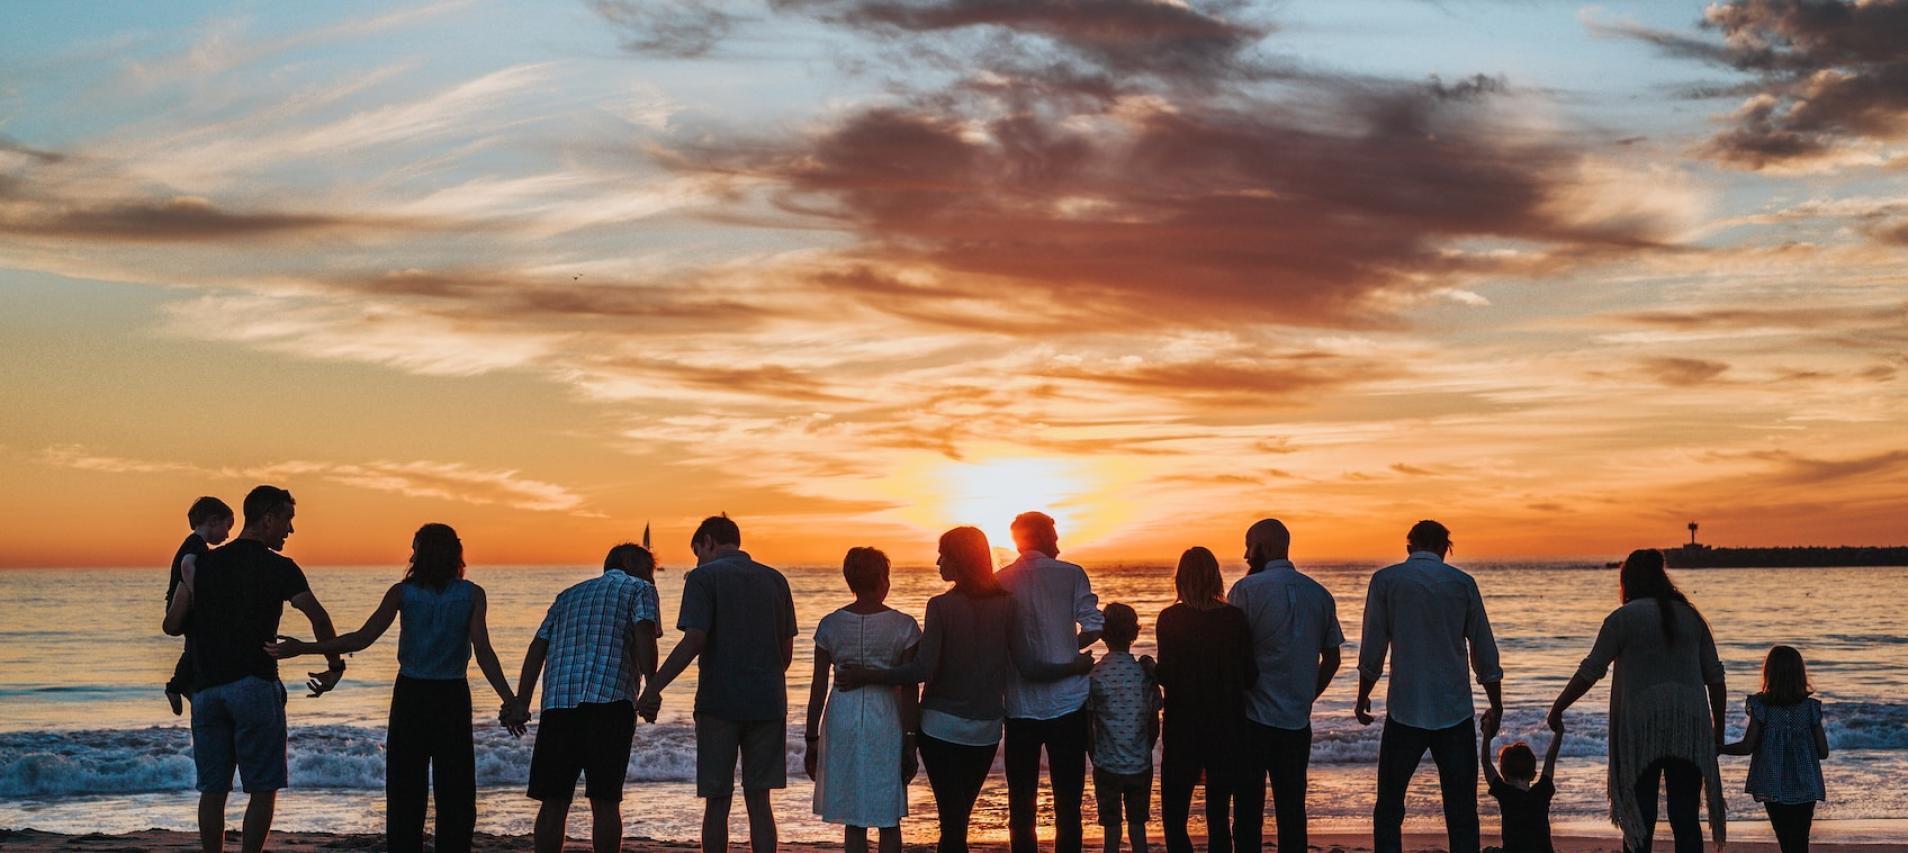 multiple families facing sunset on a beach